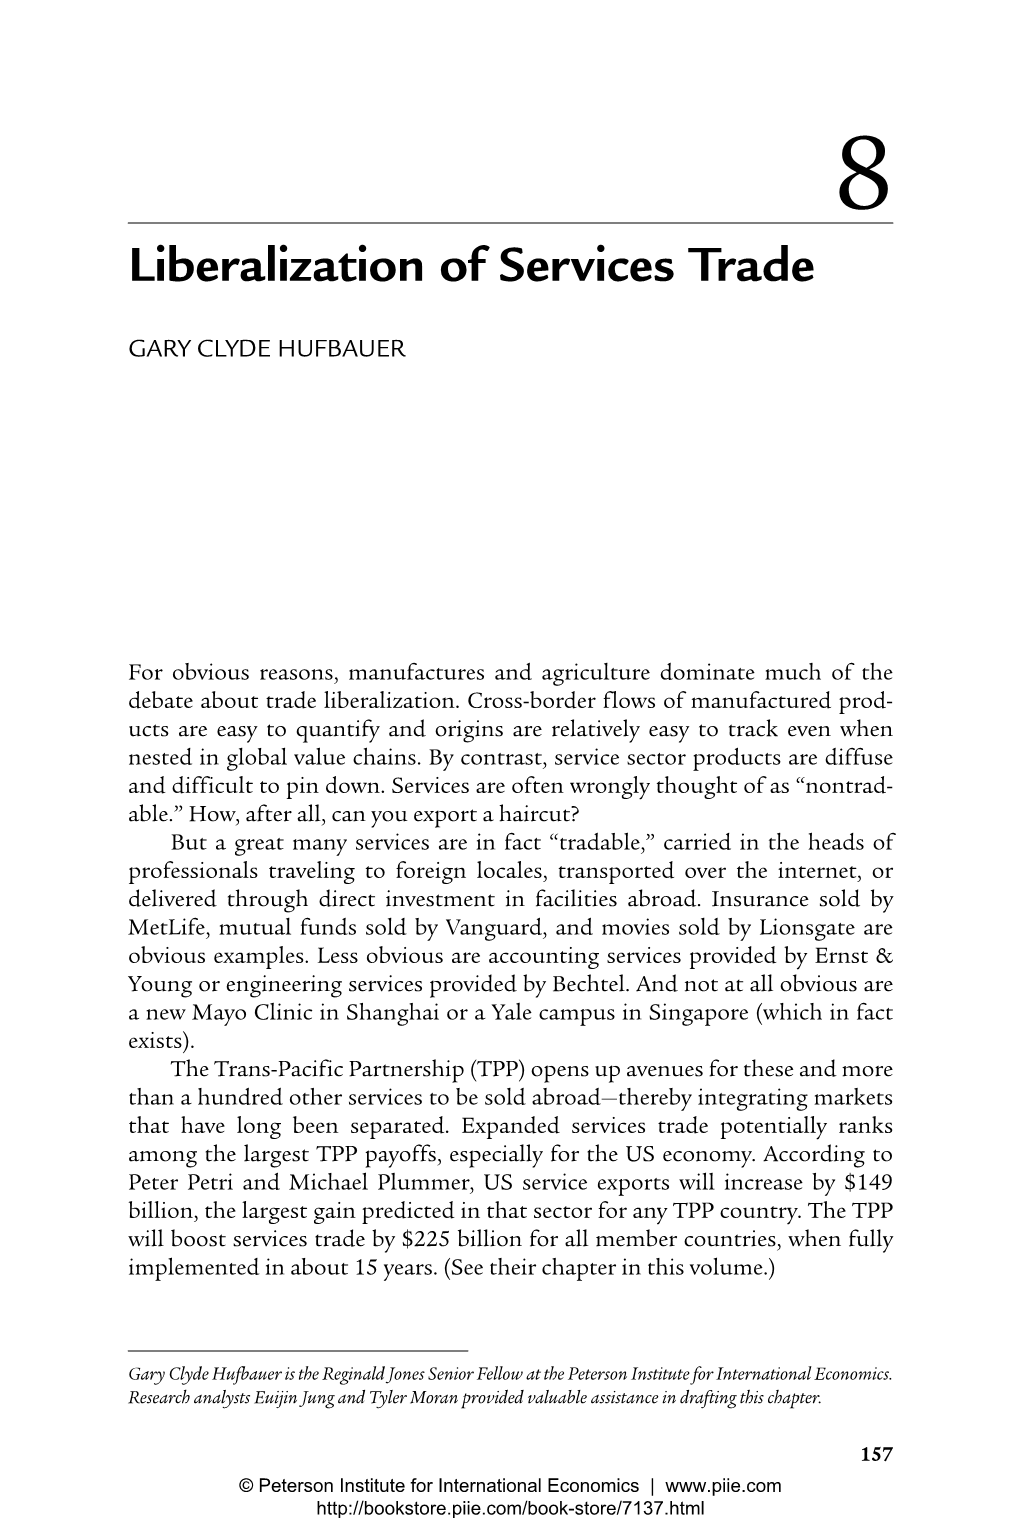 Chapter 8: Liberalization of Services Trade